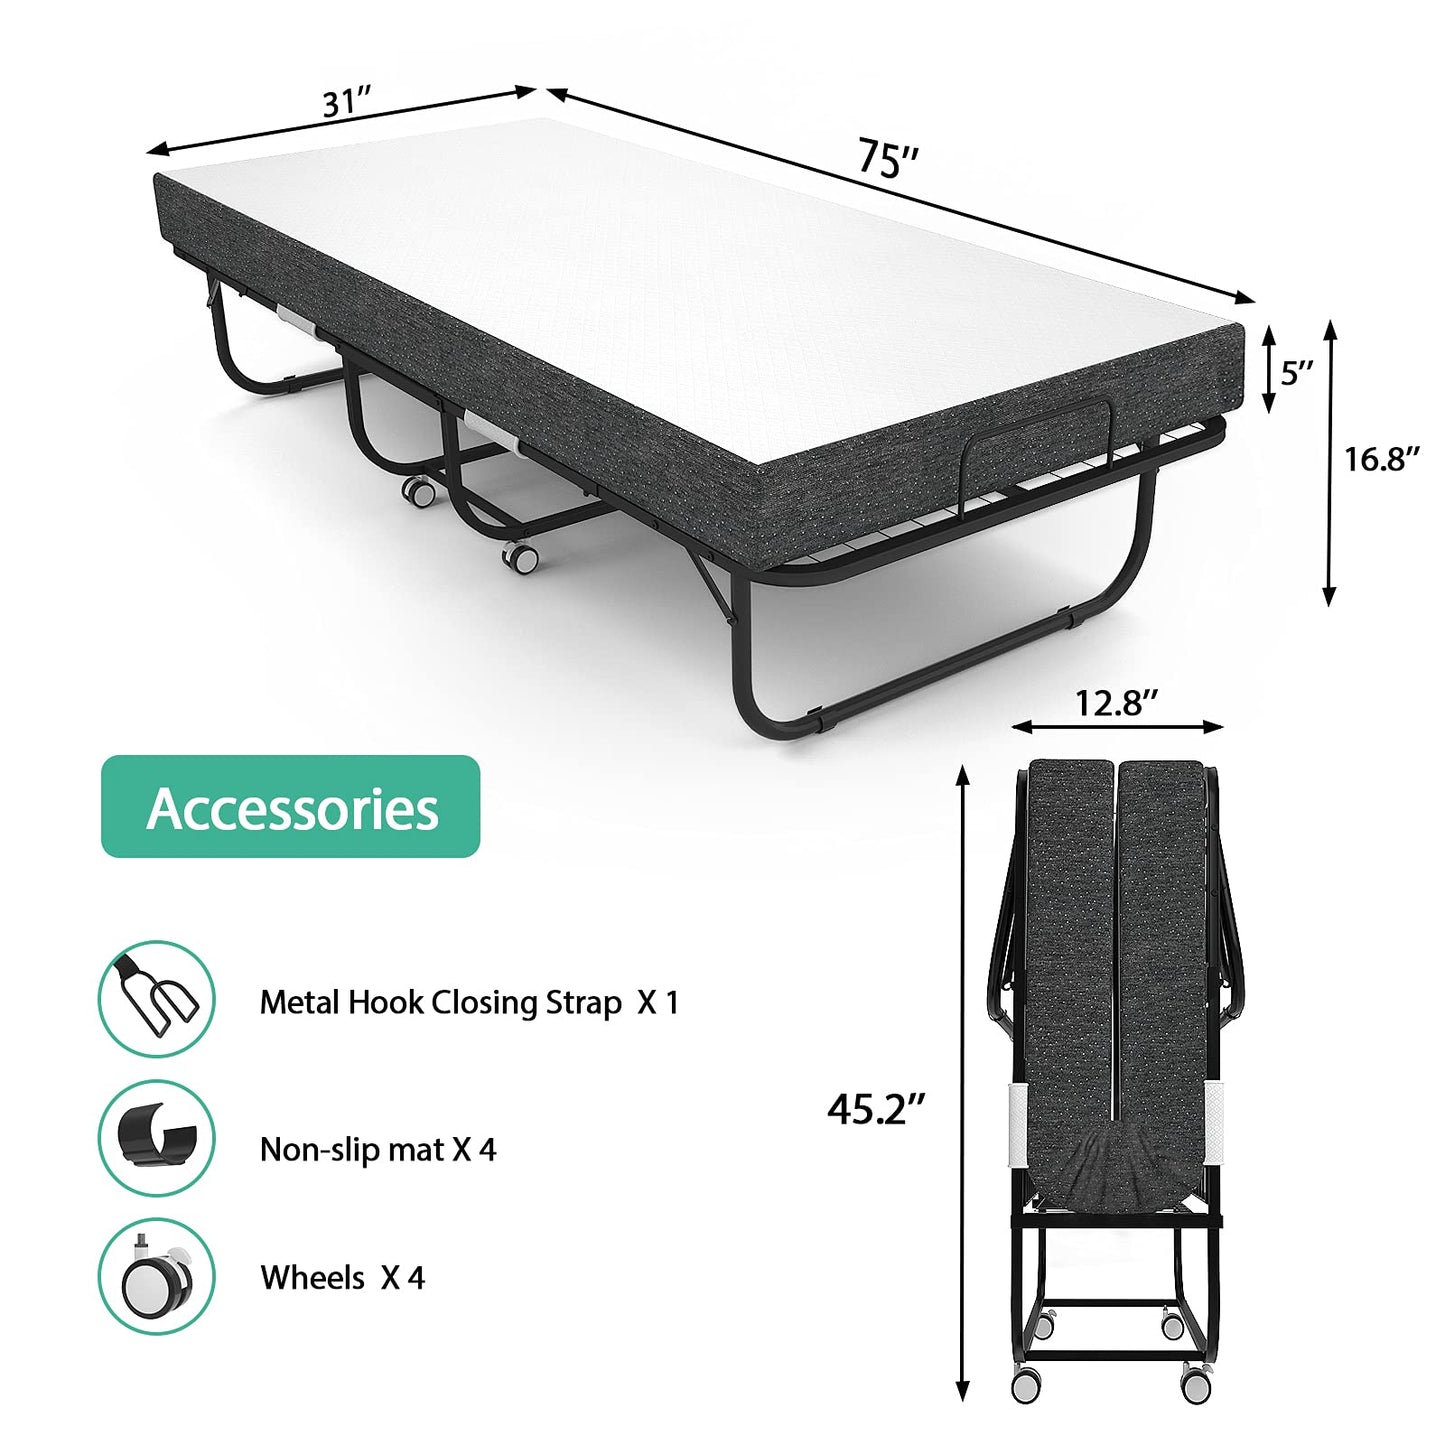 Foxemart Folding Bed with Mattress Portable Foldable Guest Beds Cot Size Rollaway Beds for Adults with Luxurious Memory 5 Inch Foam Mattress and Super Sturdy Frame, 75 x 31 Inch